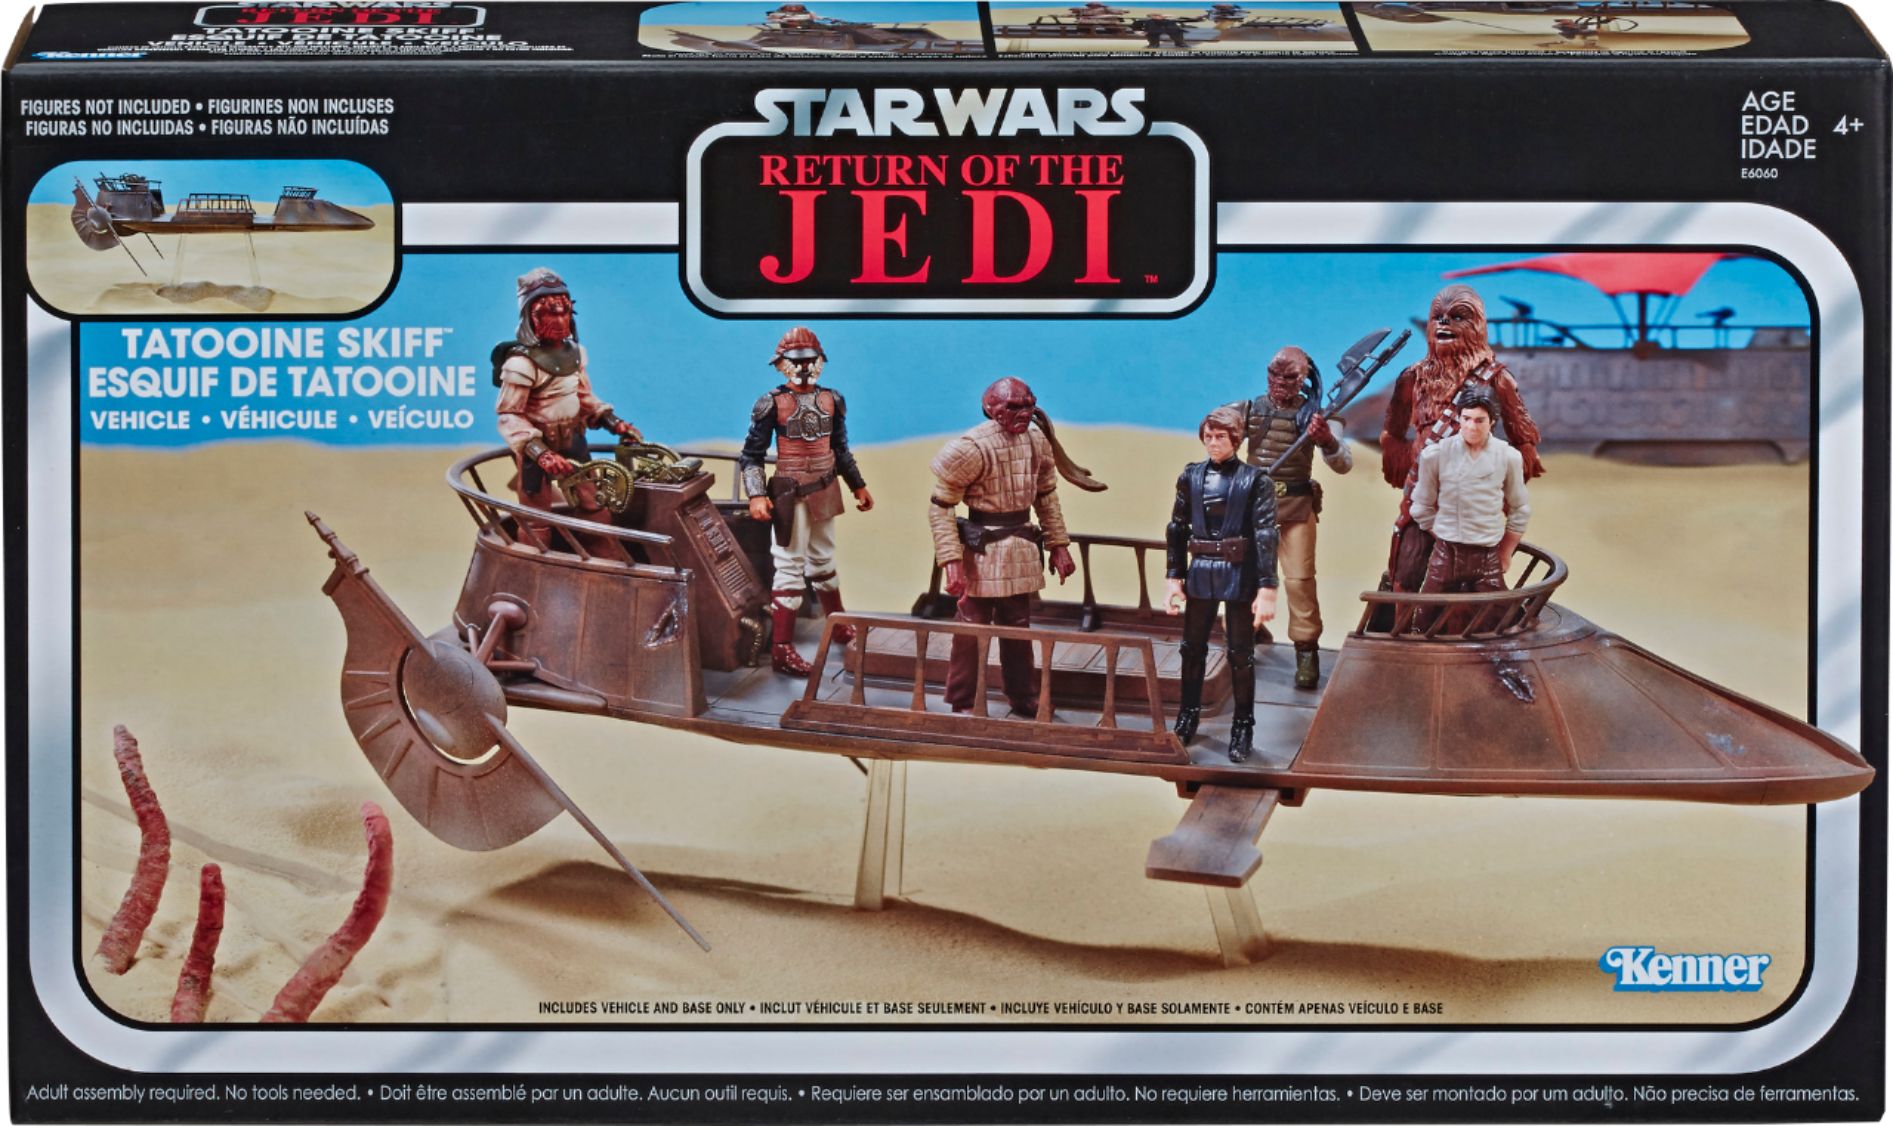 New in stock Star Wars 3.75" Vintage Collection Jabbas Tatooine Skiff 